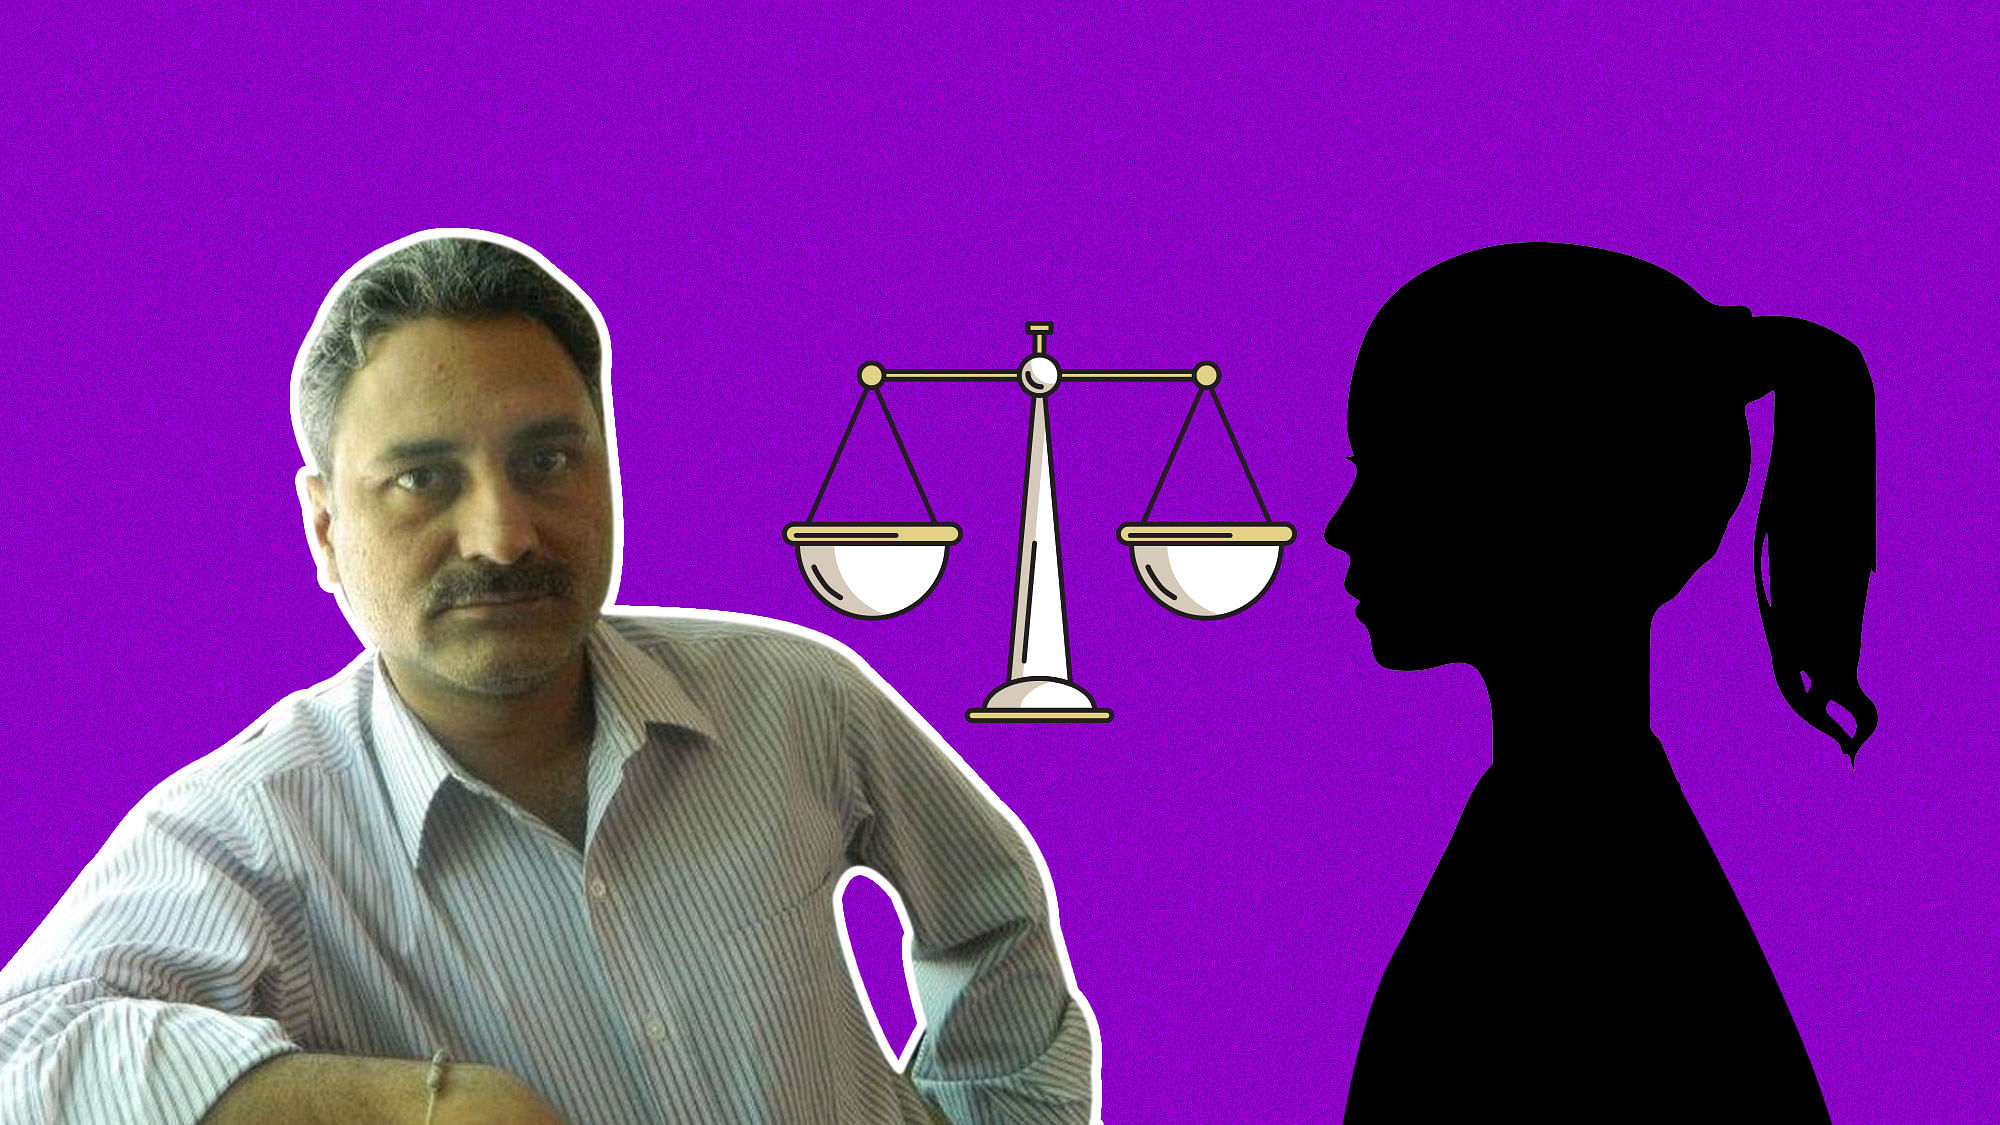 

The ‘Peepli Live’ co-director, was given the benefit of doubt and acquitted of rape charges.